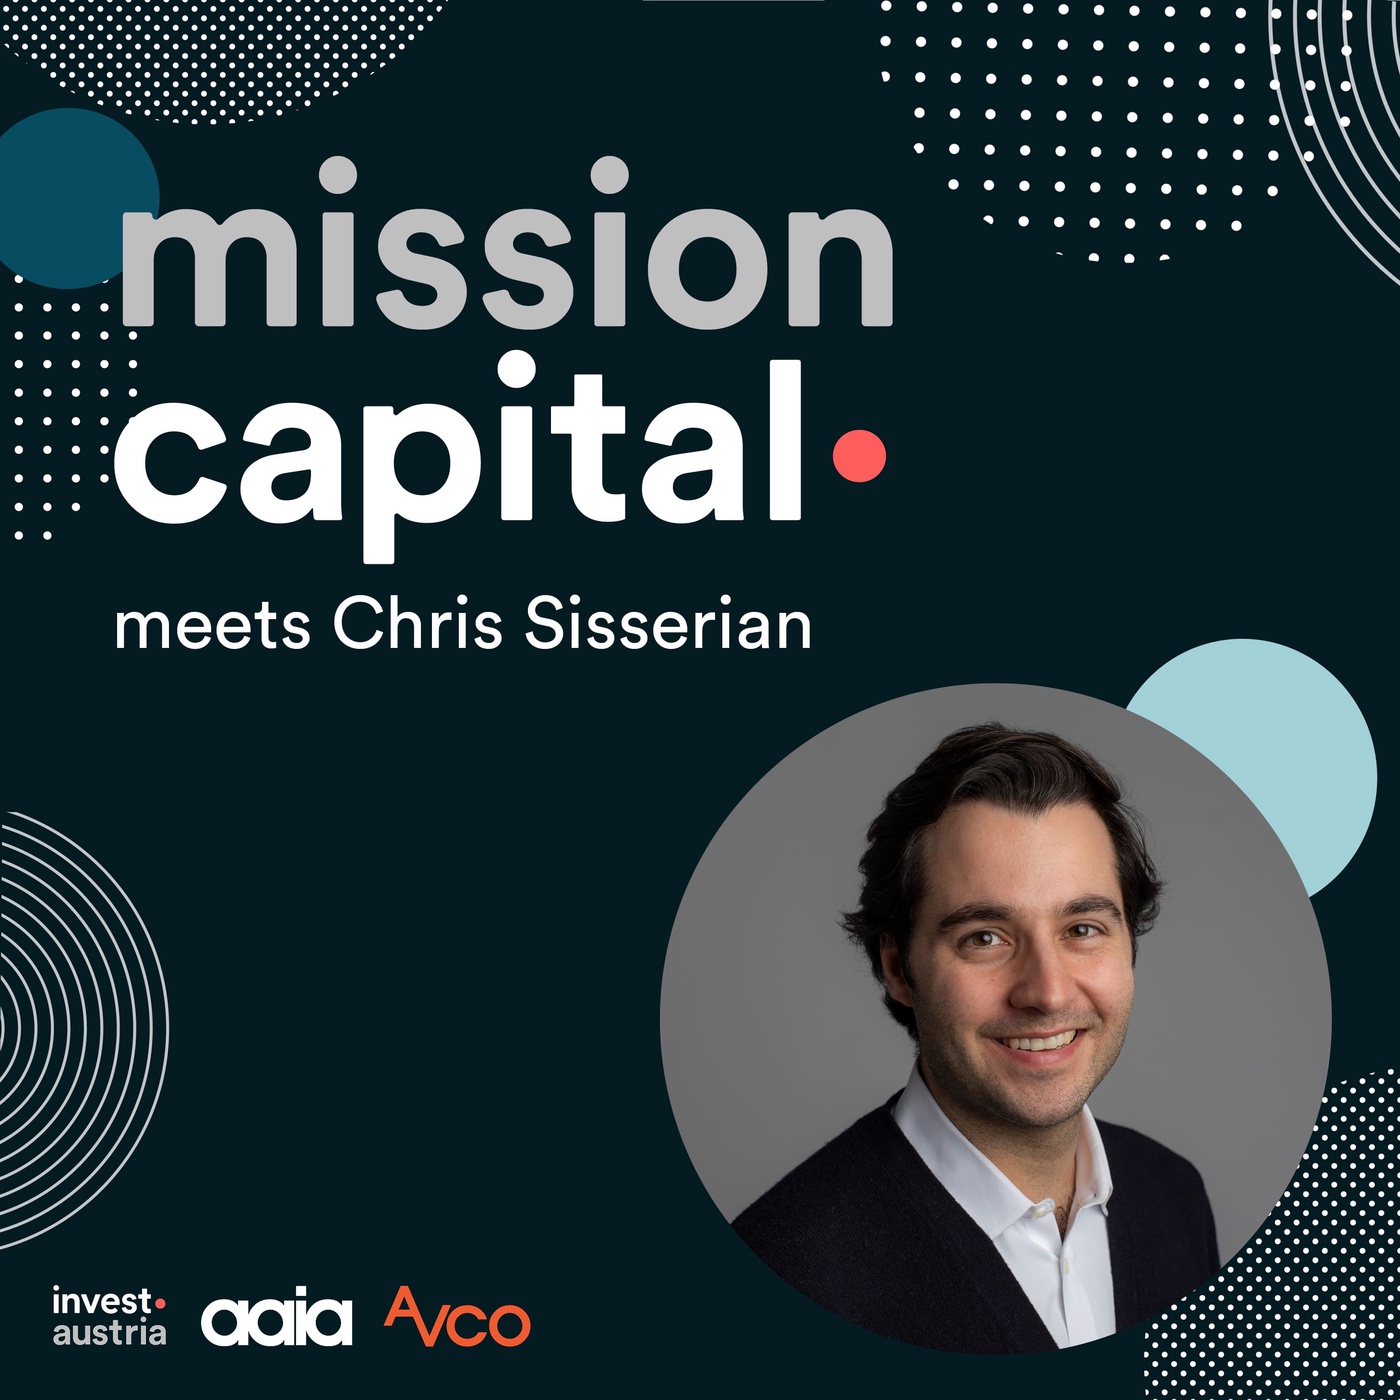 #8 mission capital meets Chris Sisserian